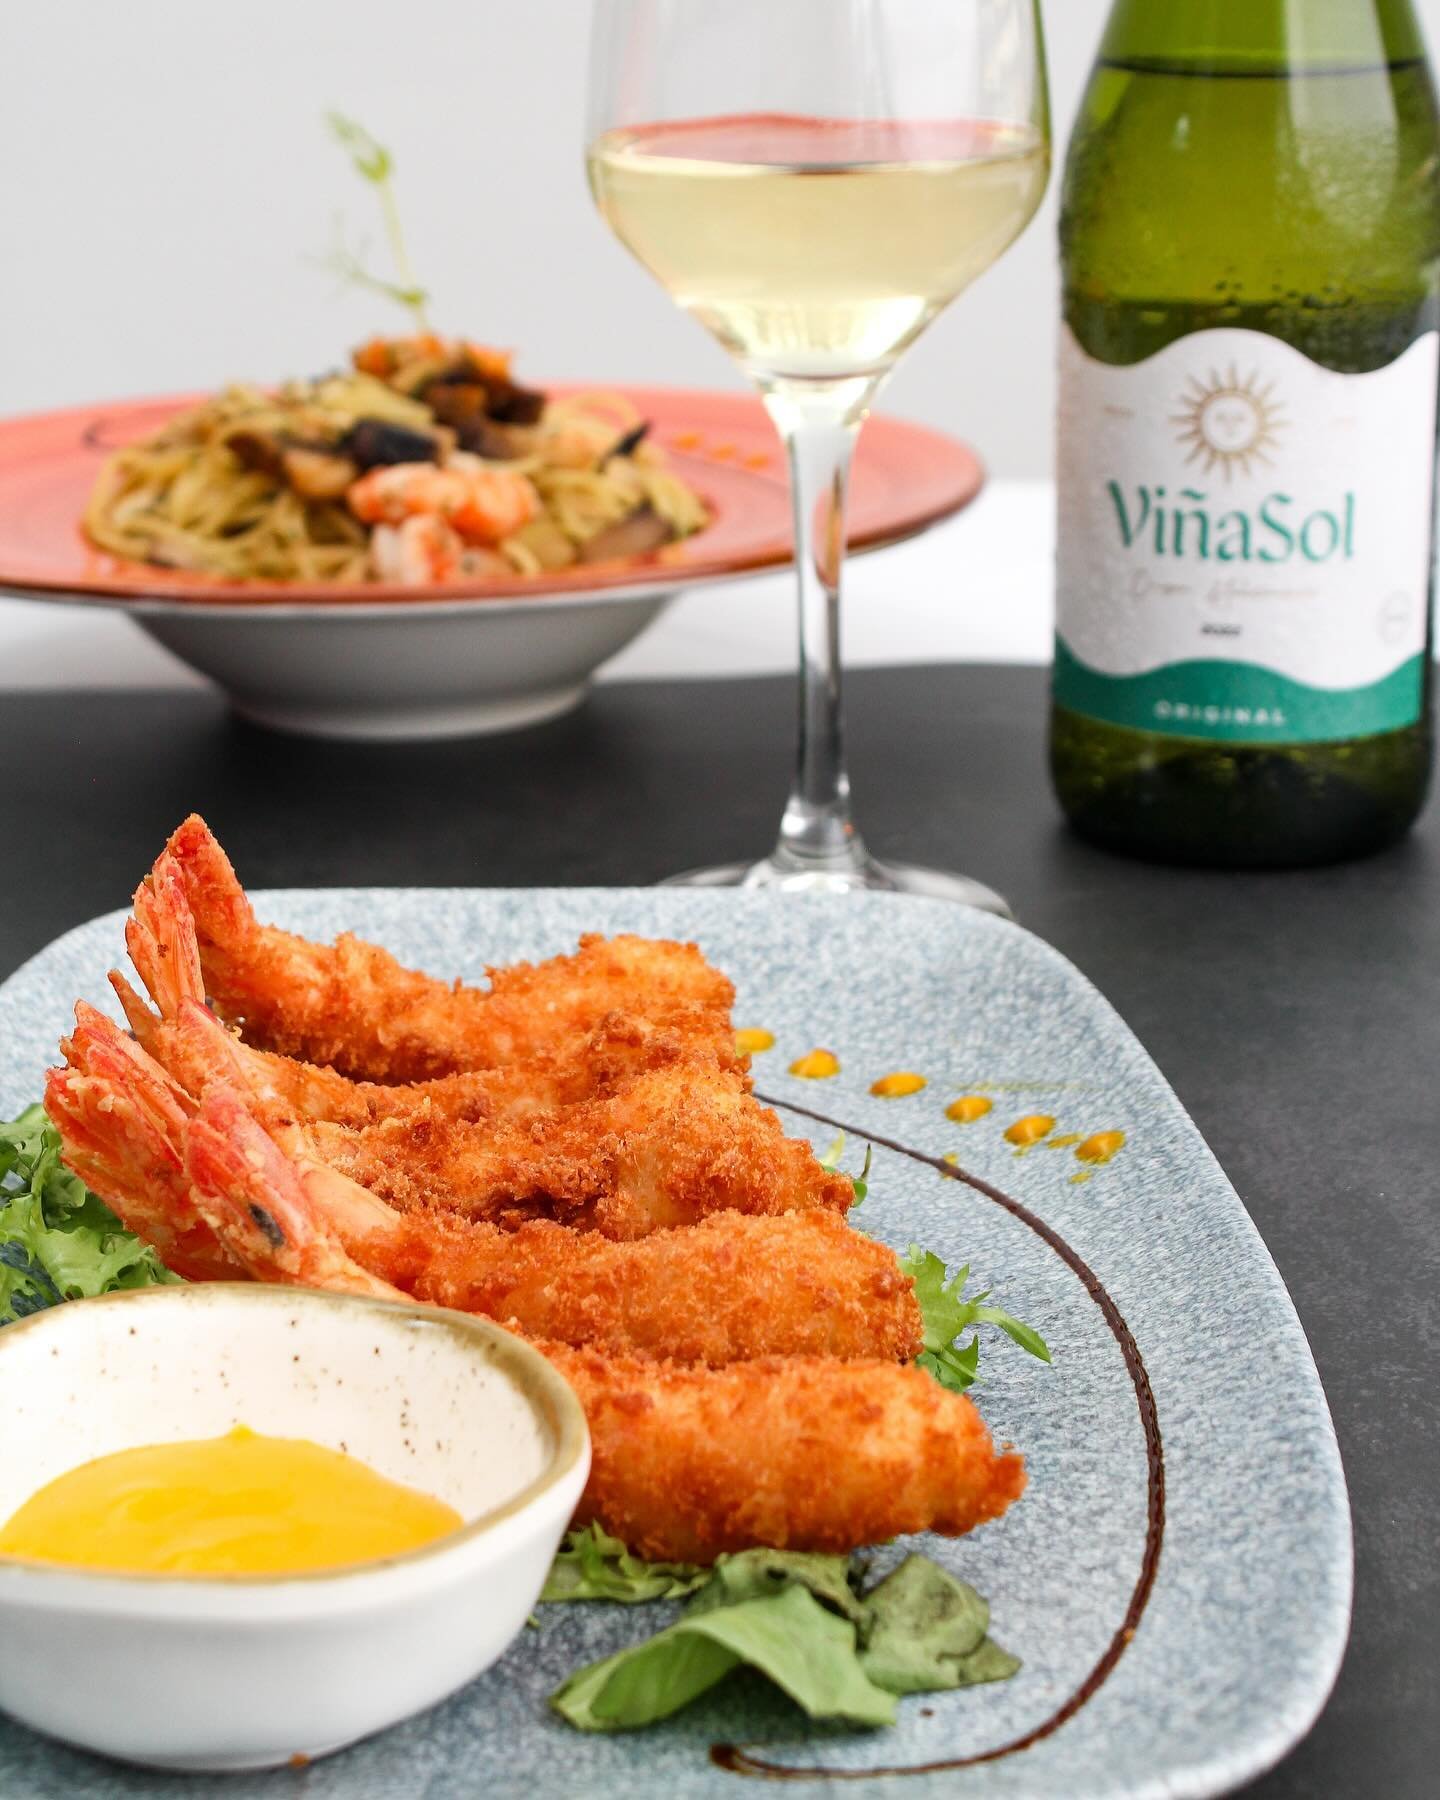 Crunchy, crispy and tasty, try today our Kings Prawns 🍤, one of our customers&rsquo; favourite starters paired with one of best selection of white wine.
.
.
Crujientes, crujientes y sabrosos, pruebe hoy nuestros Langostinos Crujientes 🍤, uno de los